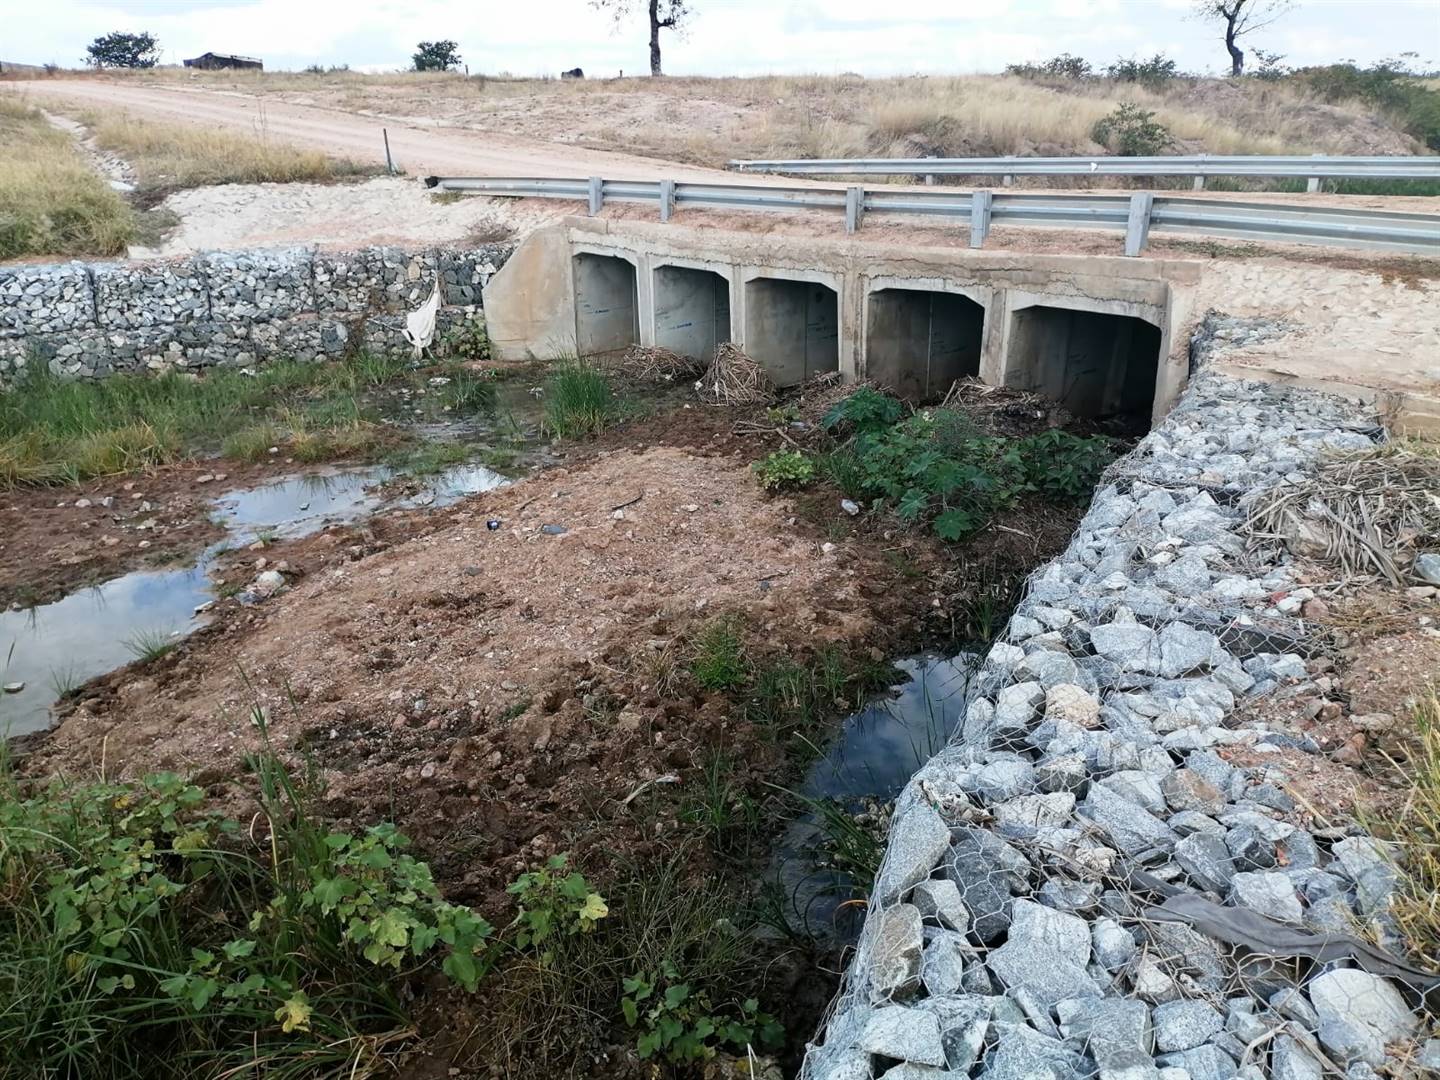 News24 | Struggling Limpopo municipality spends R5m on gravel bridge without risk assesment